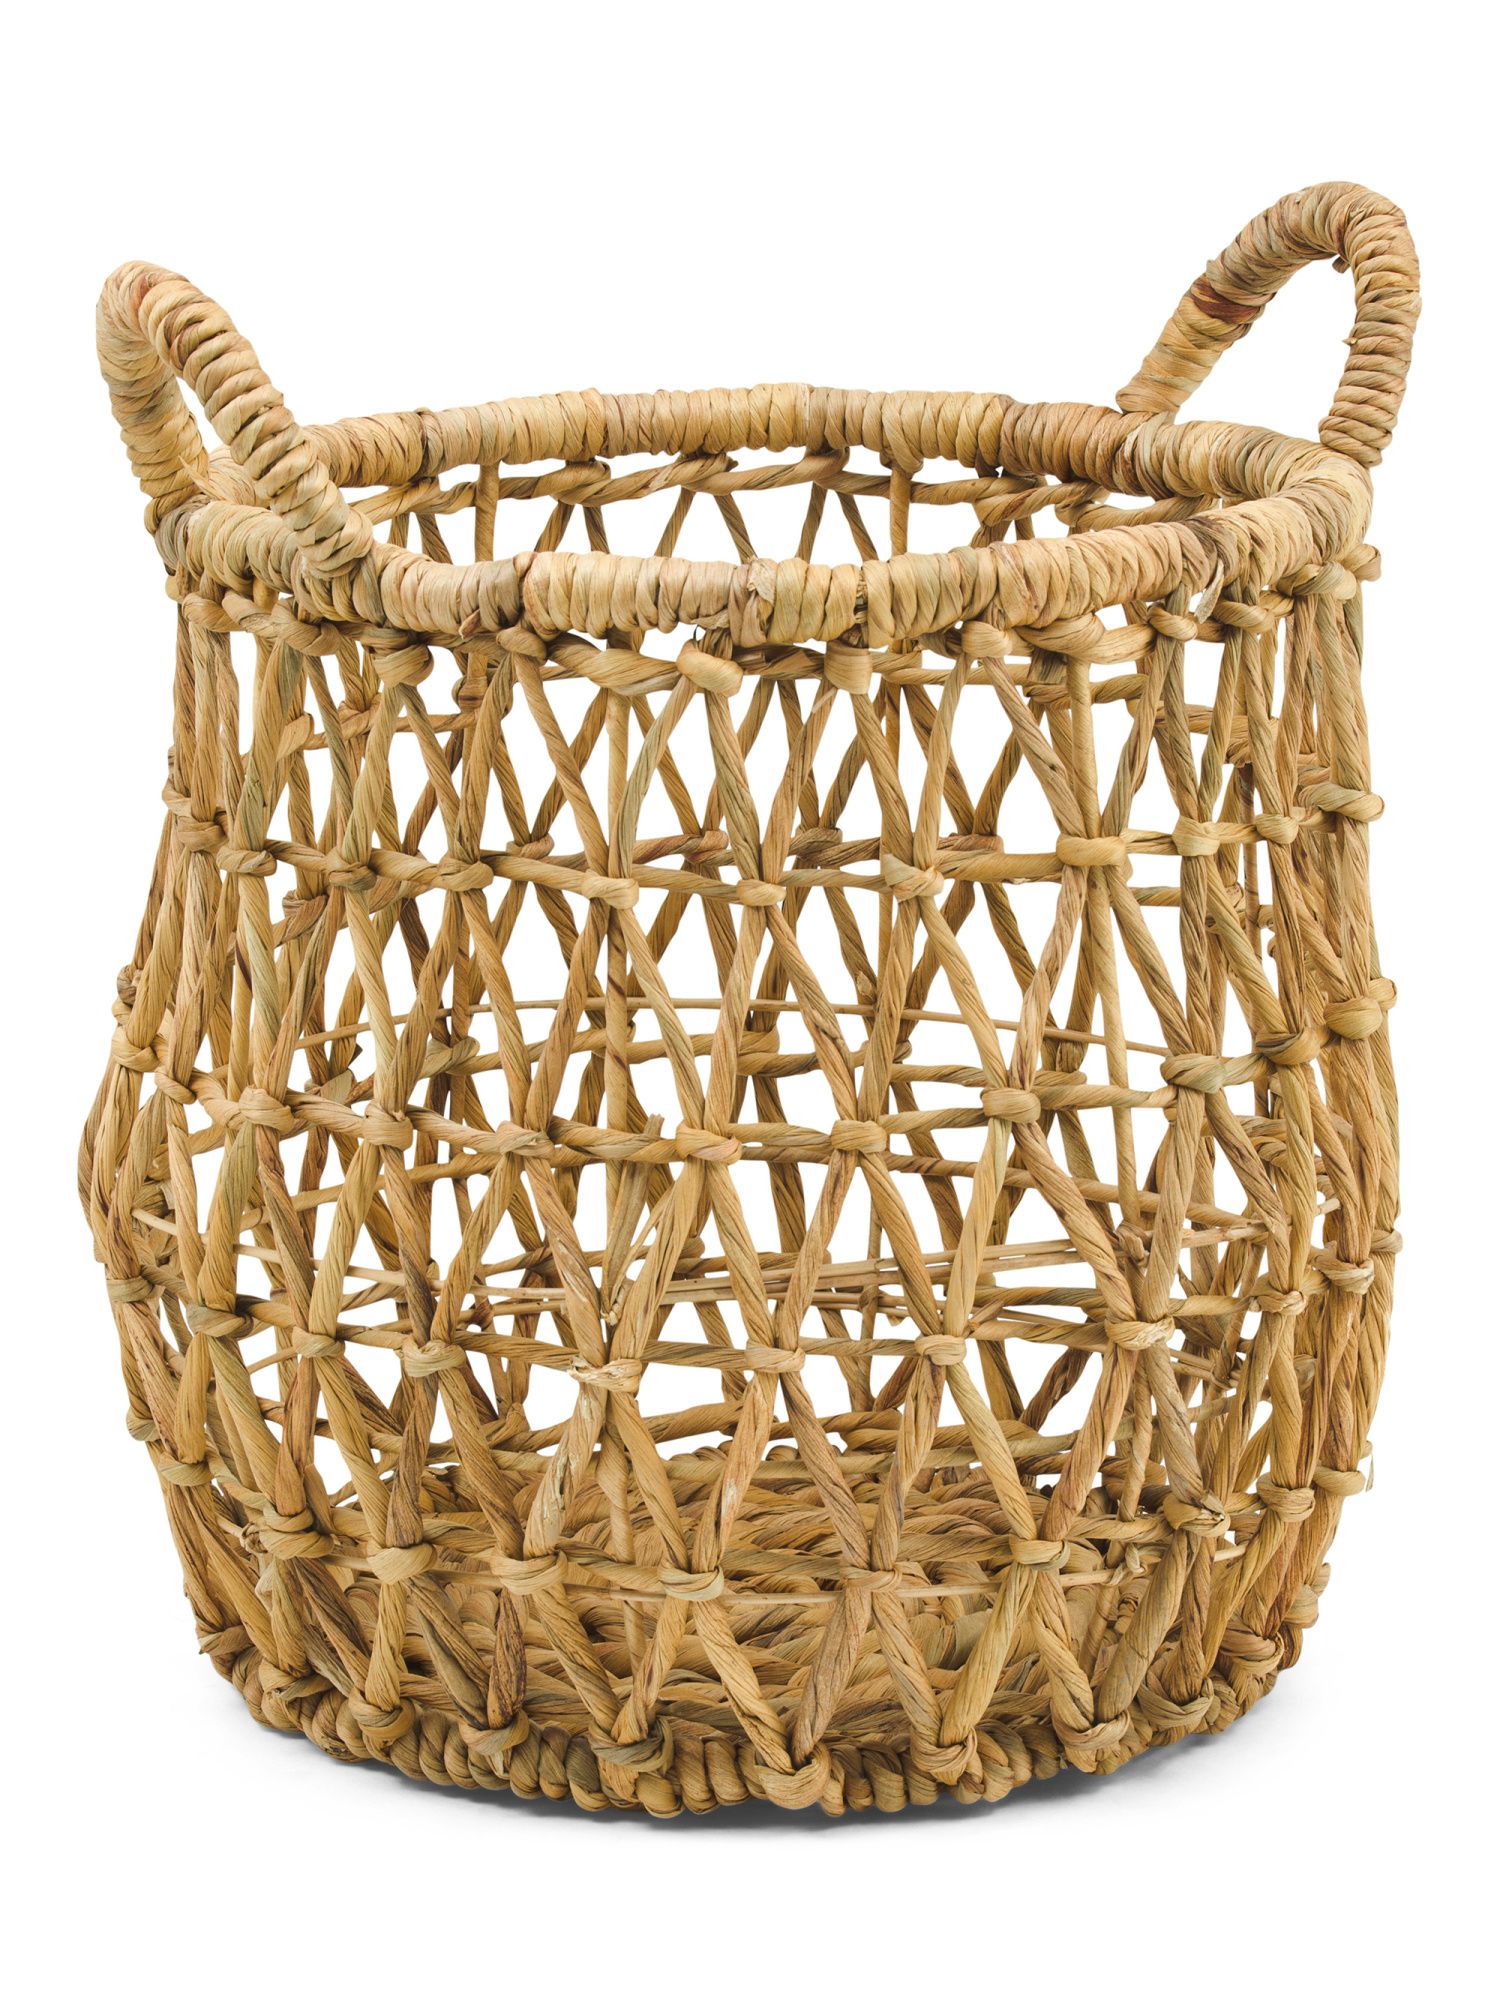 Small Natural Round Basket With Handles | TJ Maxx